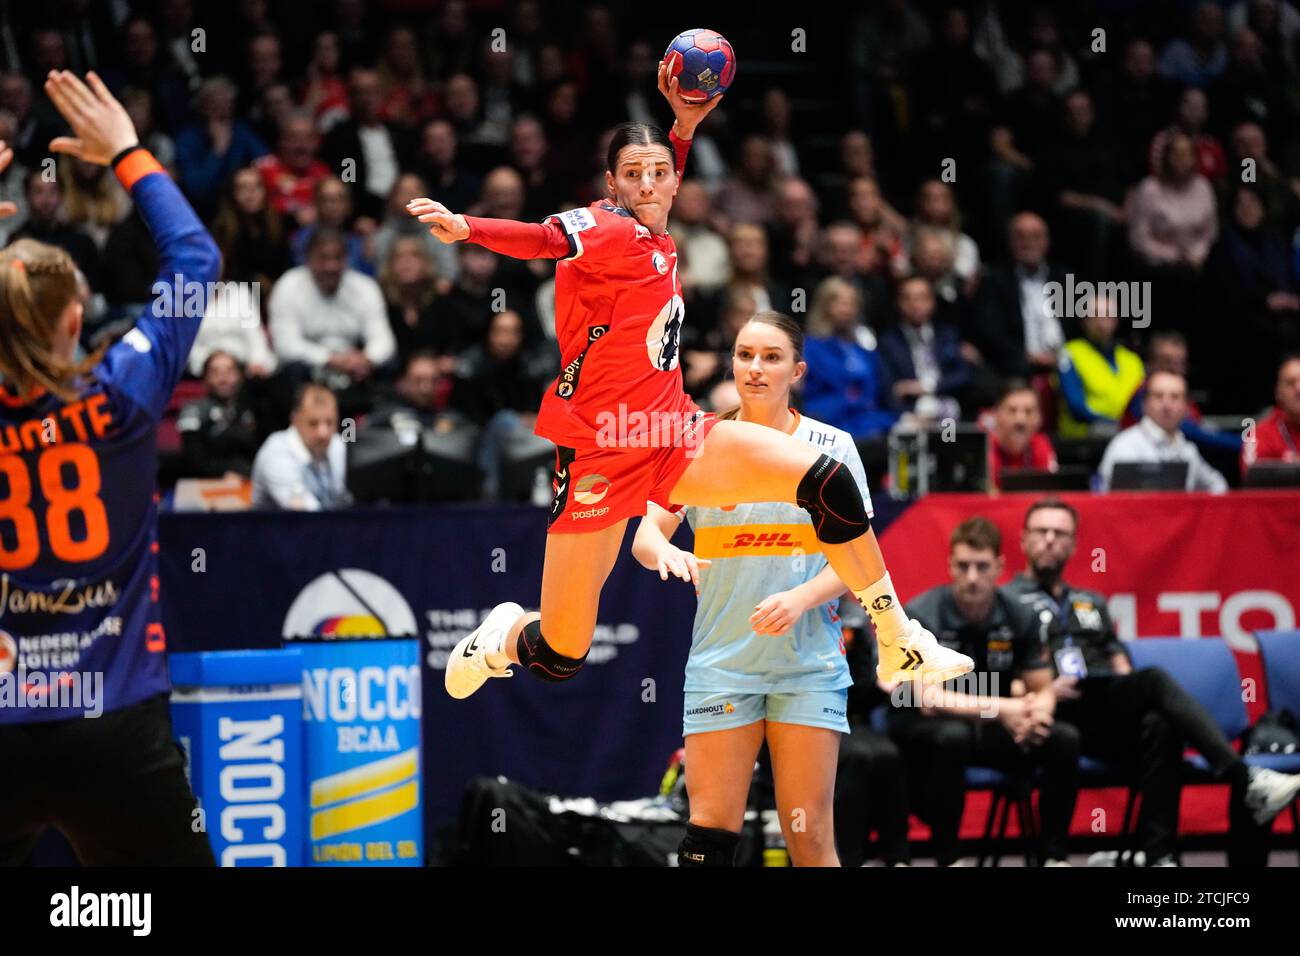 Trondheim 20231212.Norway's Stine Ruscetta Skogrand during the quarter-finals of the handball World Cup between the Netherlands and Norway in Trondheim Spektrum. Photo: Beate Oma Dahle / NTB Stock Photo